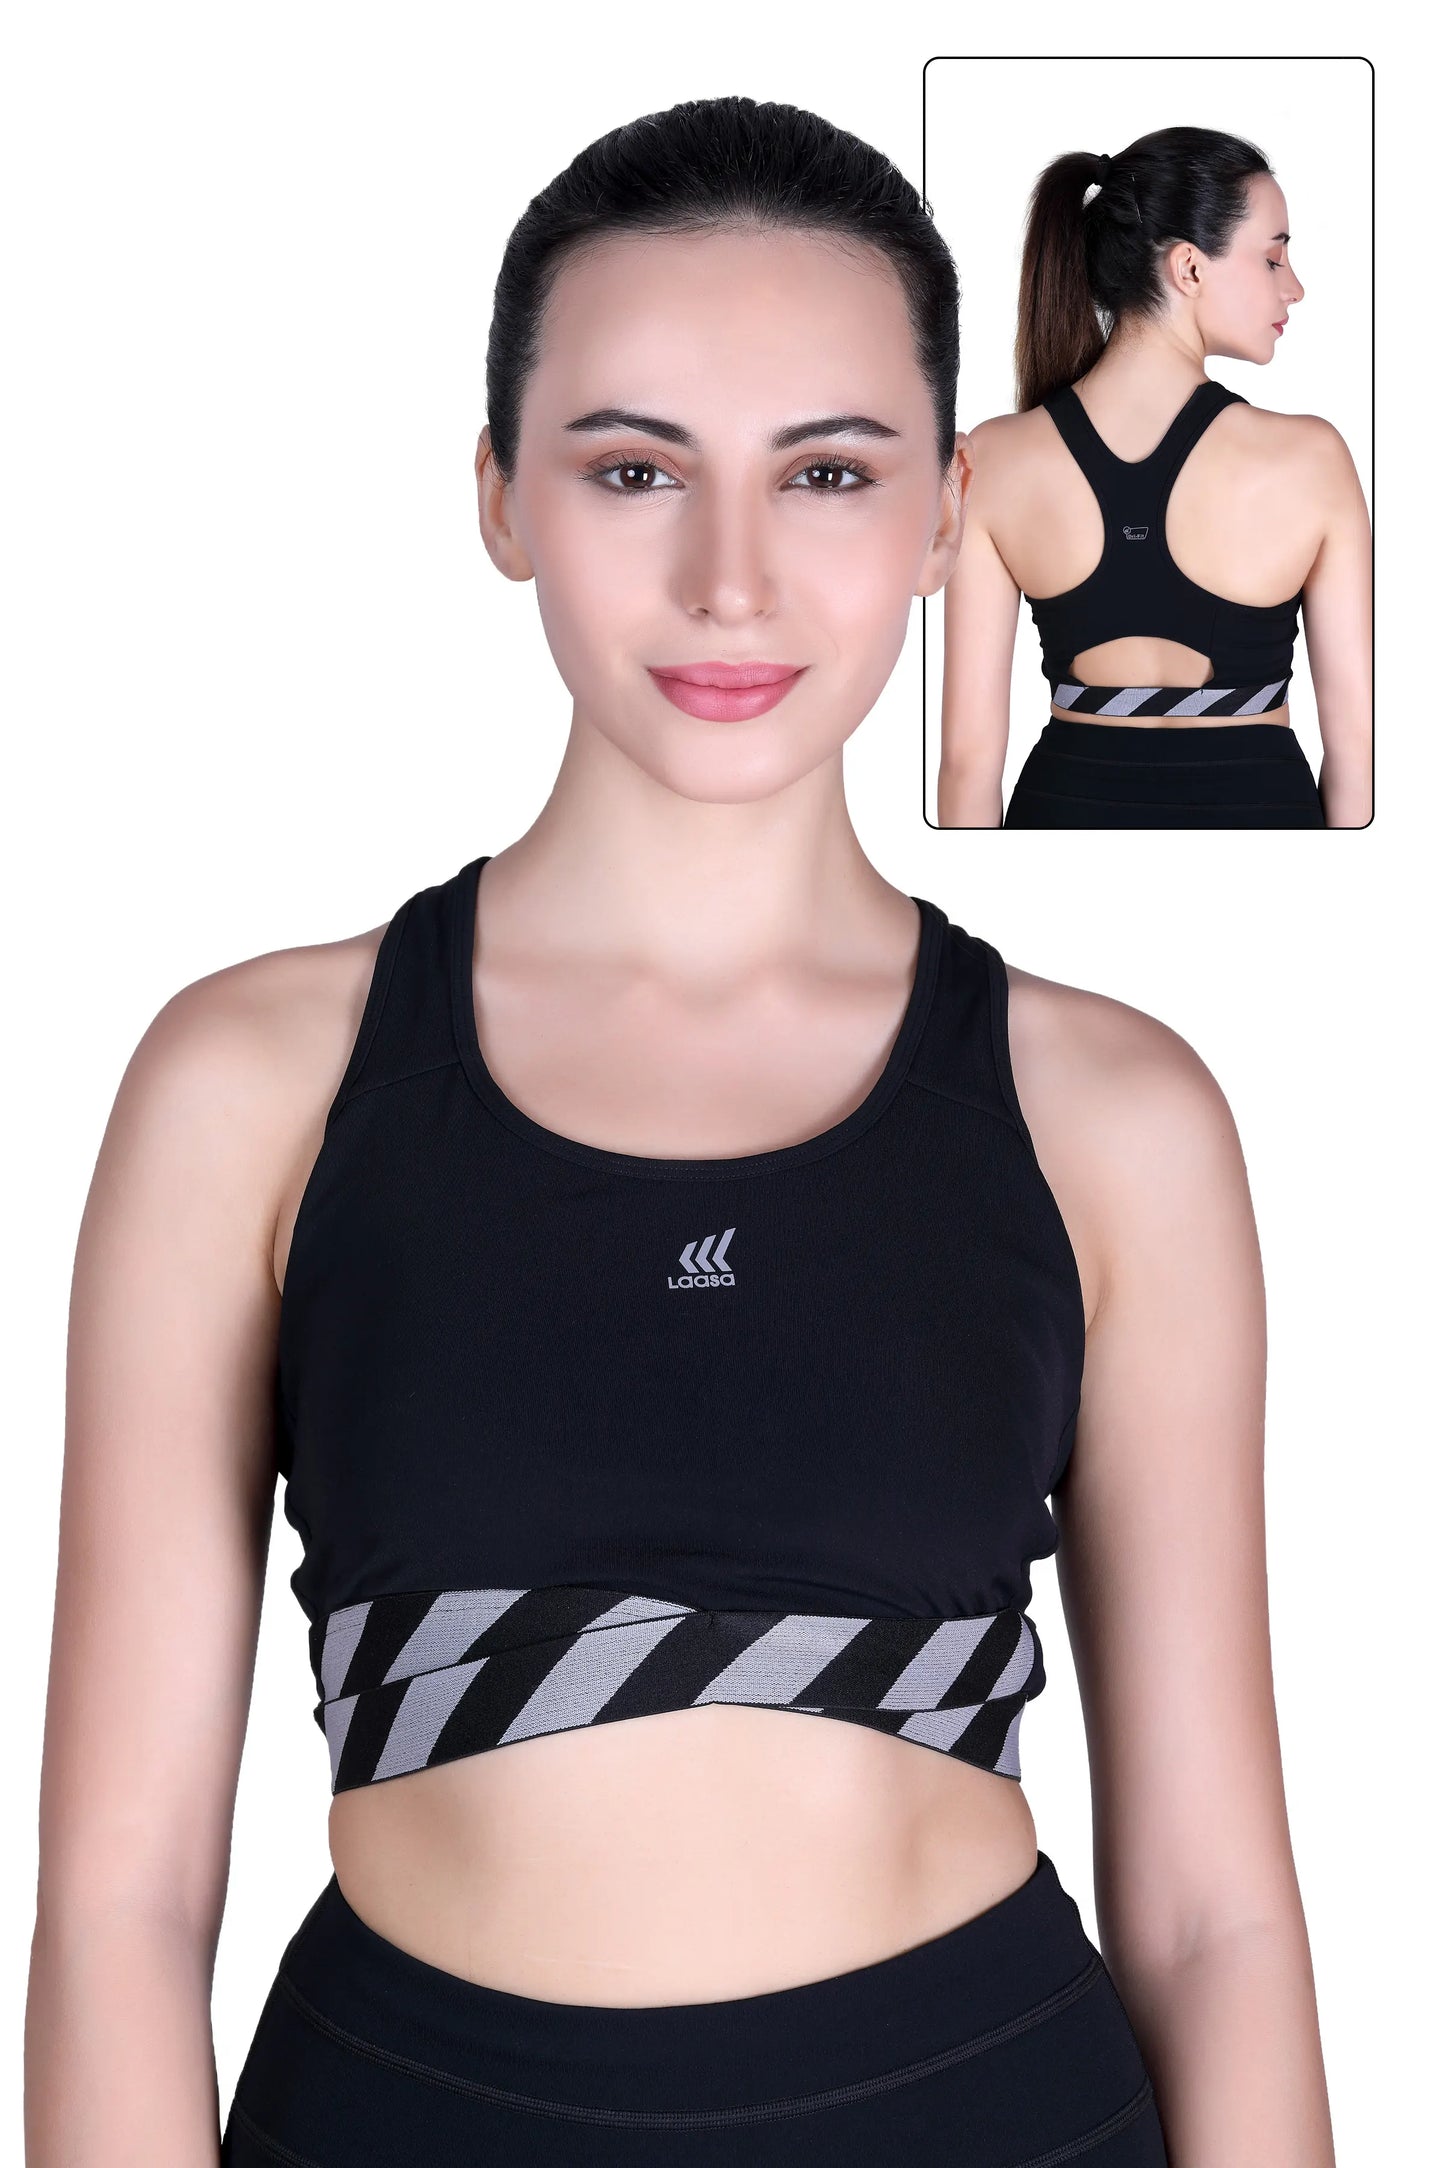 Lolmot Sports Bra for Women High Impact Padded Workout Breathable